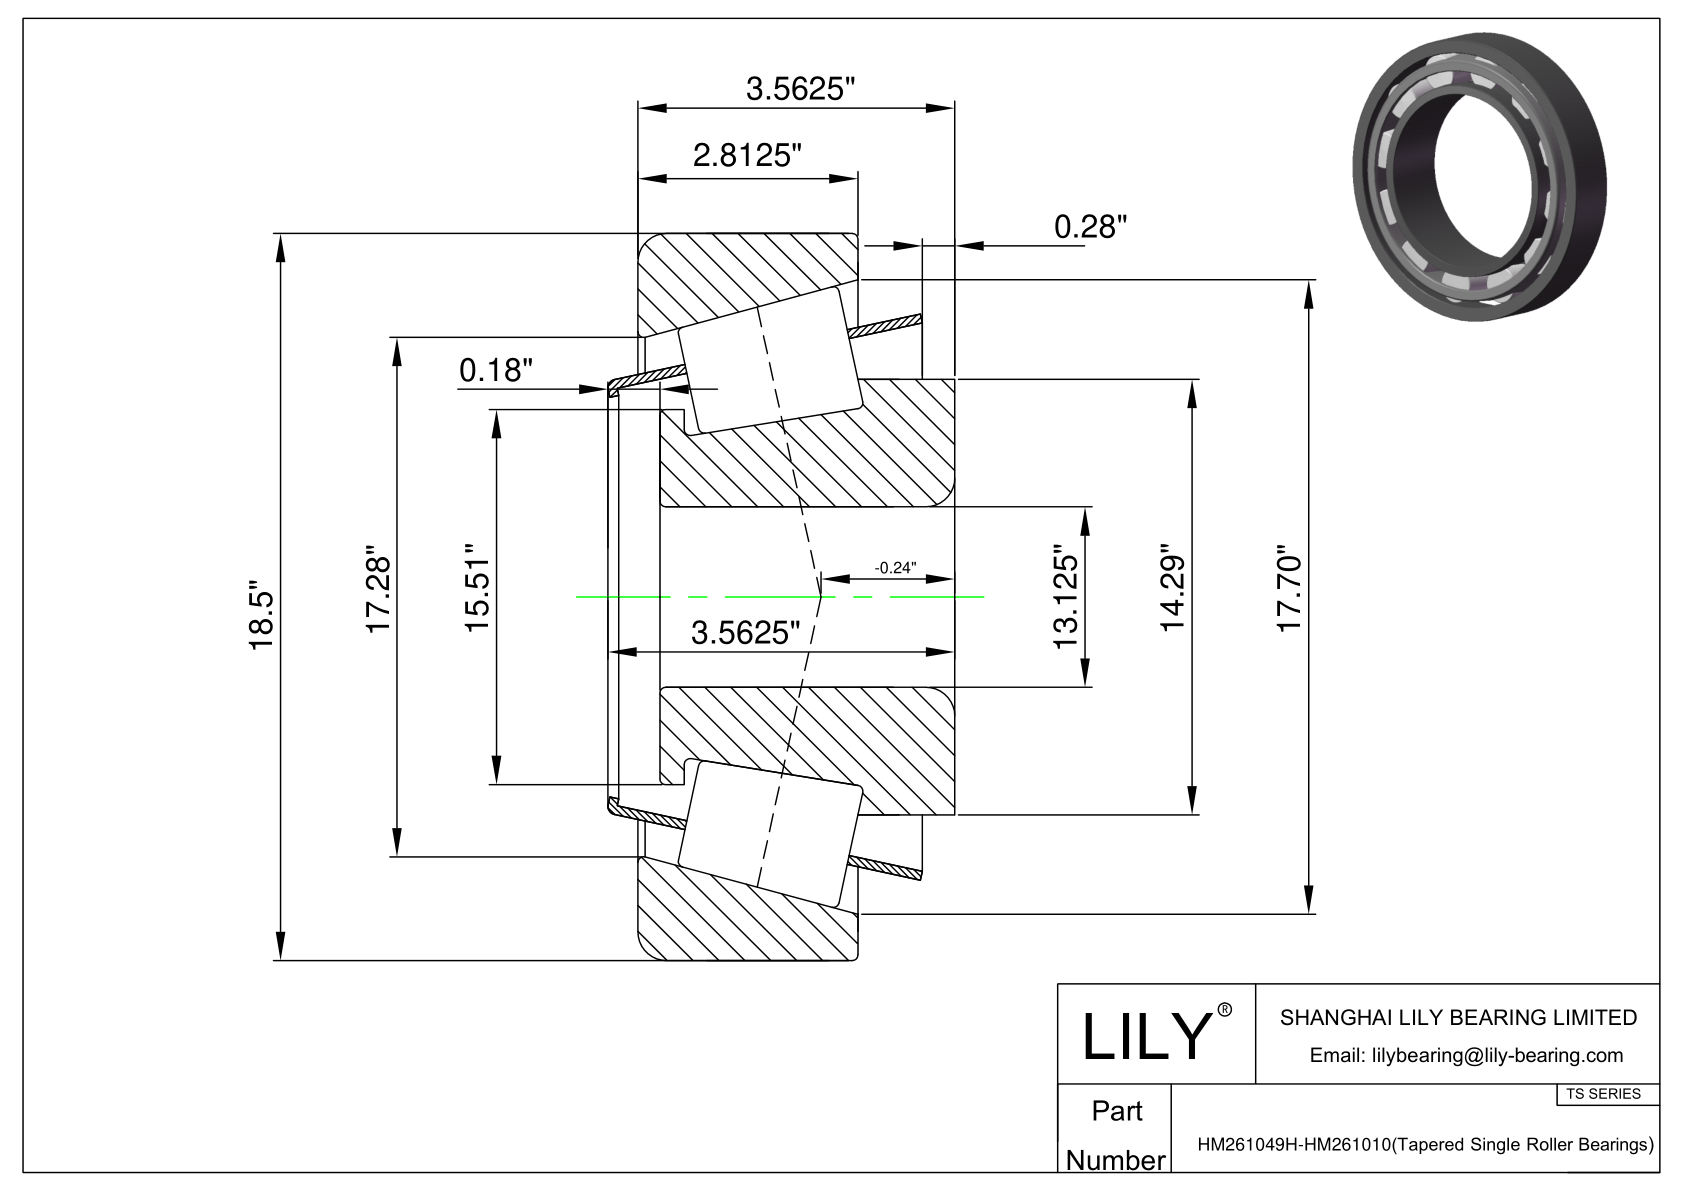 HM261049H-HM261010 TS (Tapered Single Roller Bearings) (Imperial) cad drawing